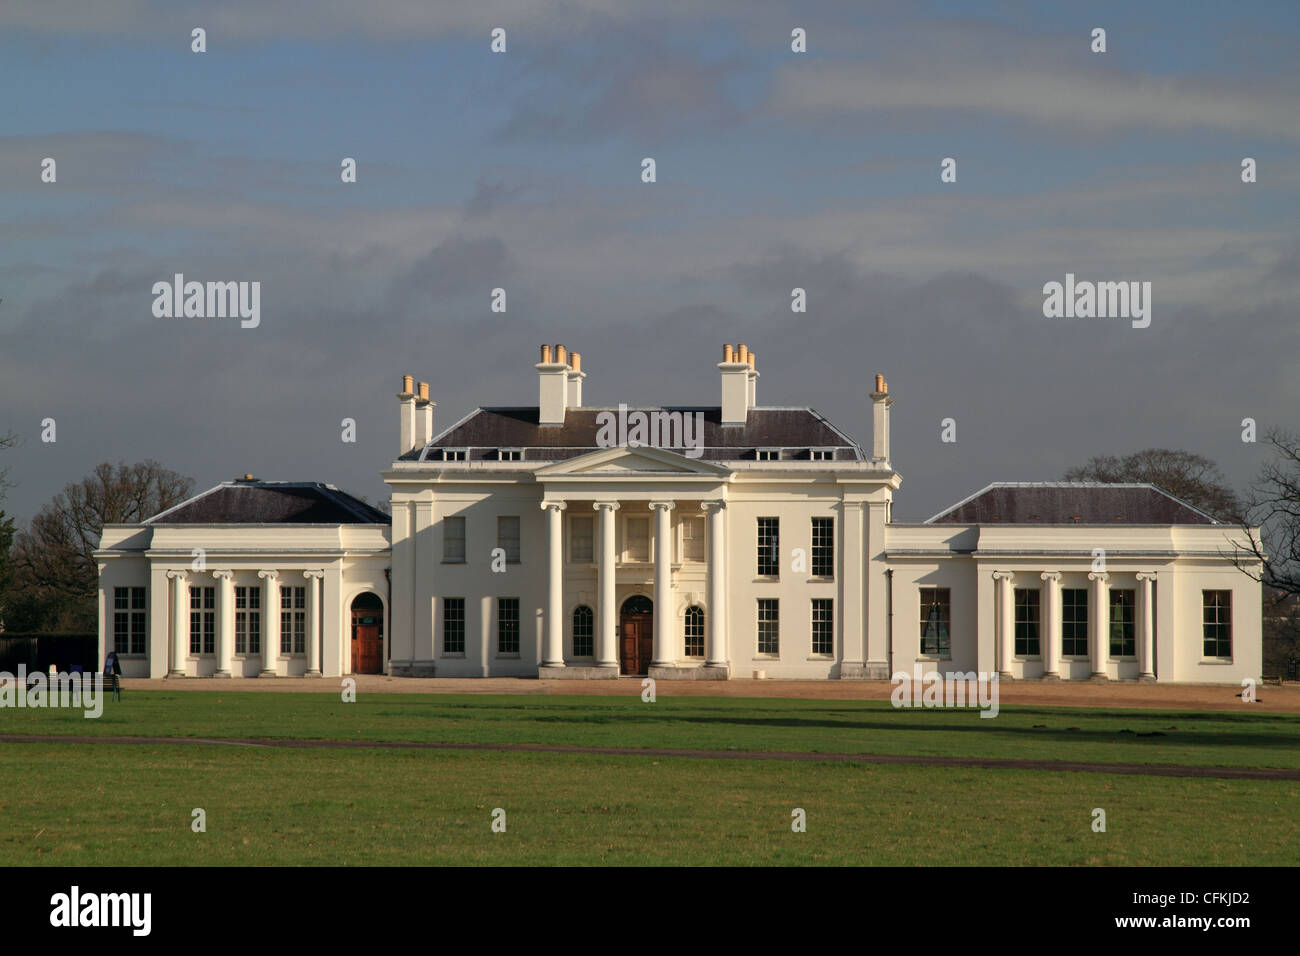 Hylands House, a Grade II* neo-classical villa situated within Hylands Park, Chelmsford, Essex, UK. Stock Photo